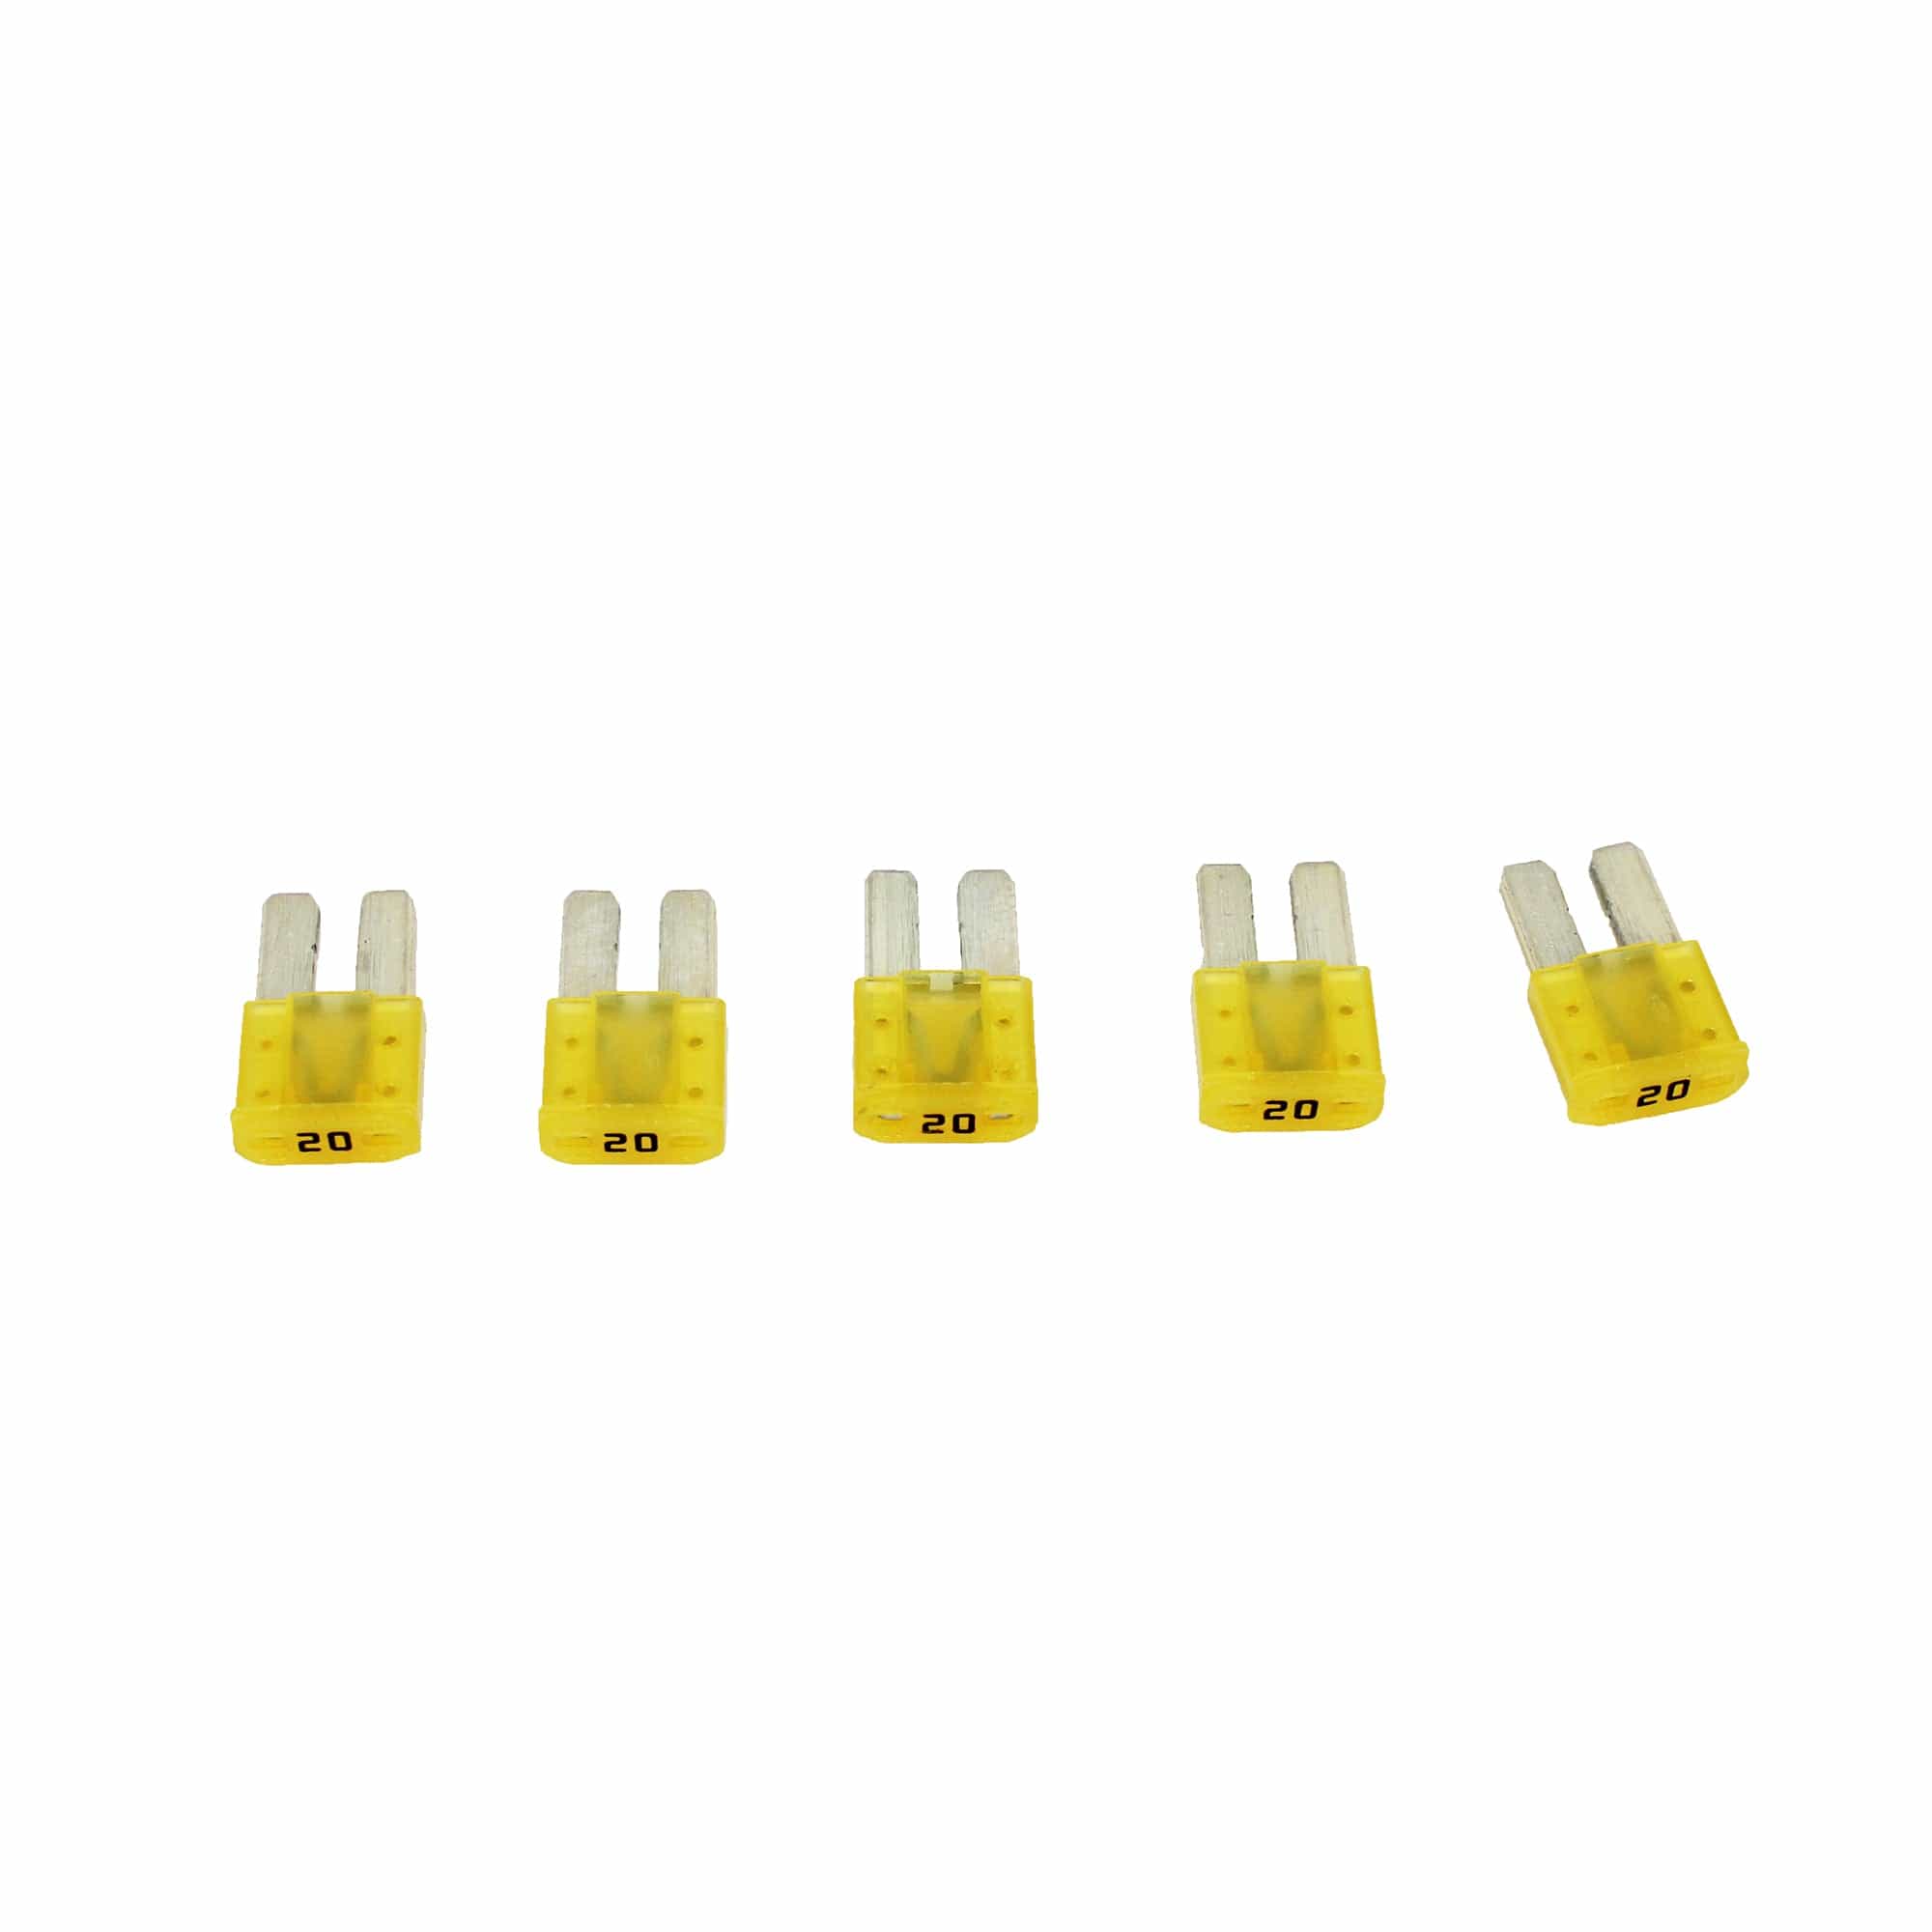 Littelfuse MIC2020.VP 20A, 32V MICRO2 Blade Fuse - 5 Pack